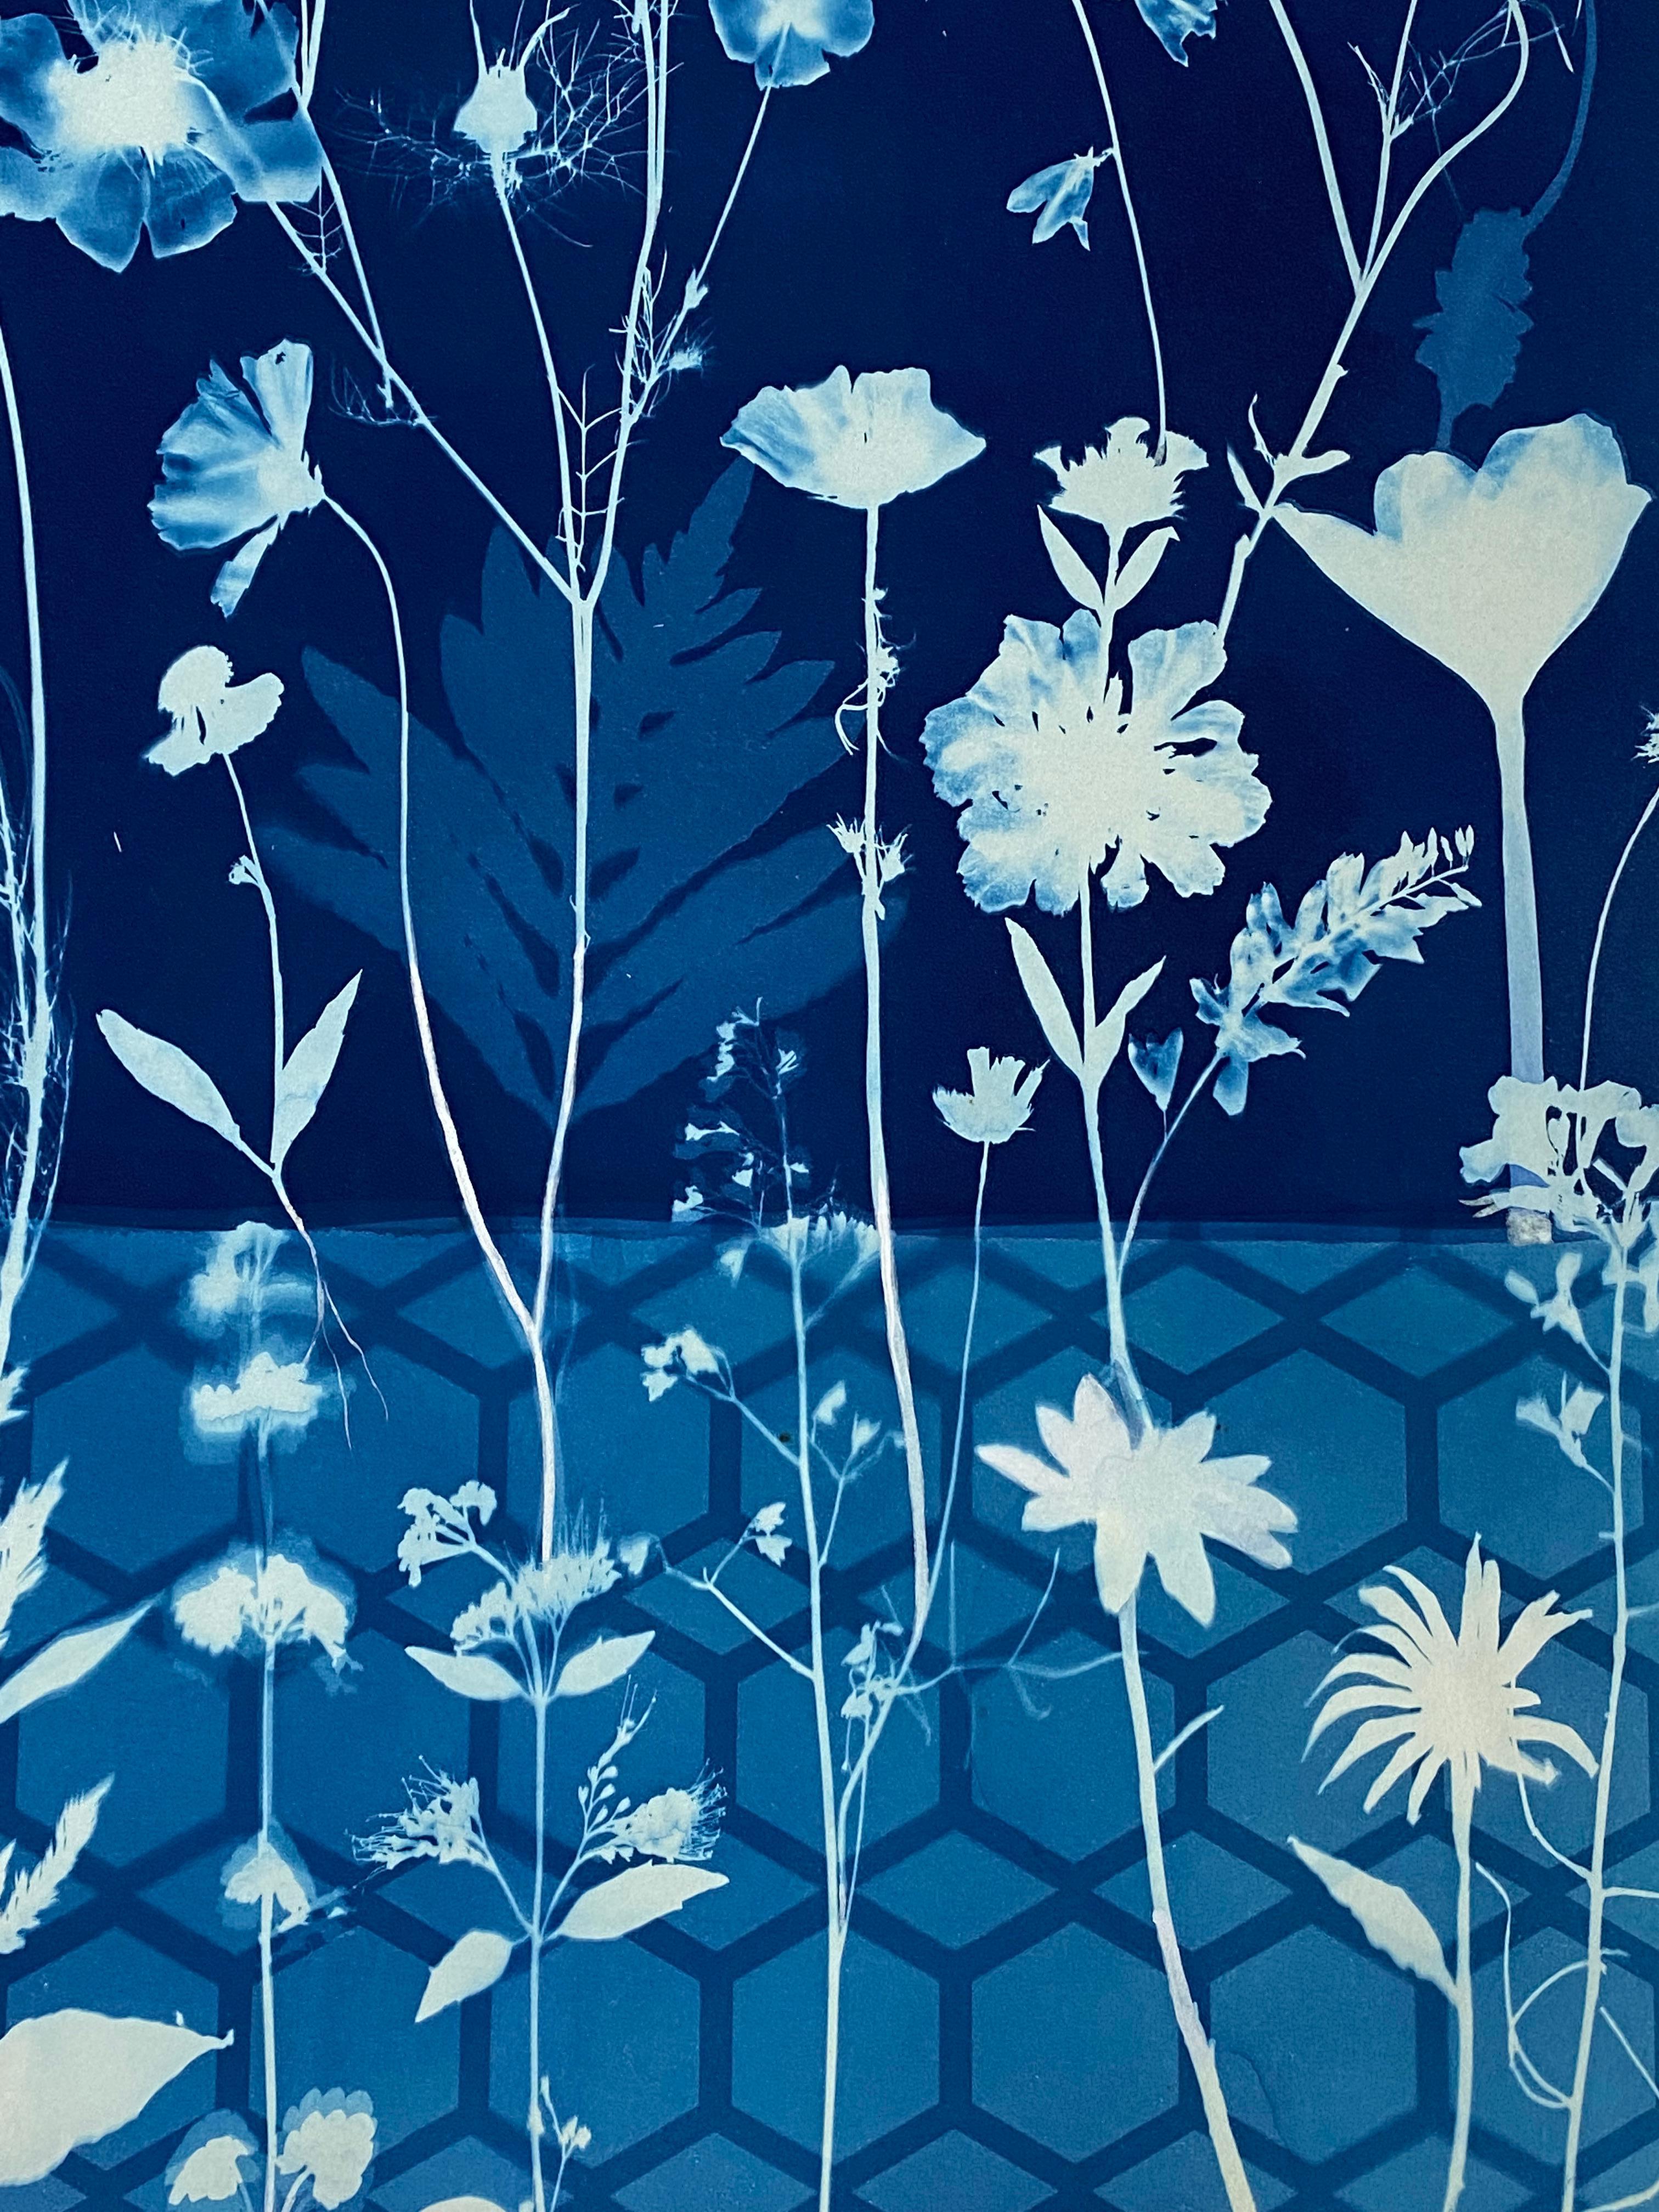 Cyanotype Painting Crocus, Star Flower, Cosmos, Ferns, Botanical Painting, Blue For Sale 2